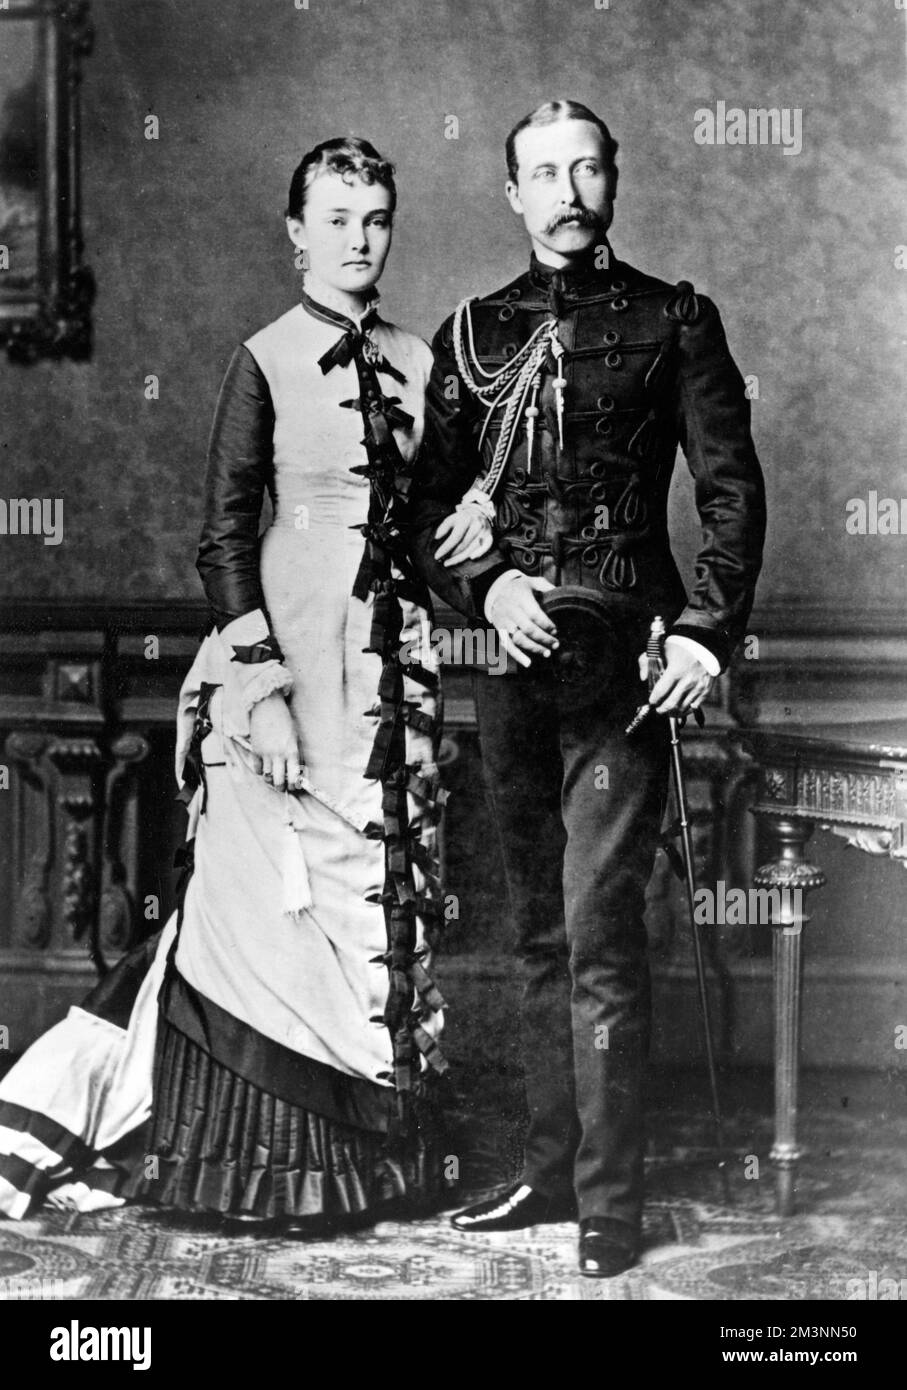 Prince Arthur, Duke of Connaught (1850 - 1942), third son of Queen Victoria, with his wife, Princess Luise Margarete of Prussia (Louise Margaret).  The couple married at St. George's Chapel in March 1879.     Date: 1879 Stock Photo